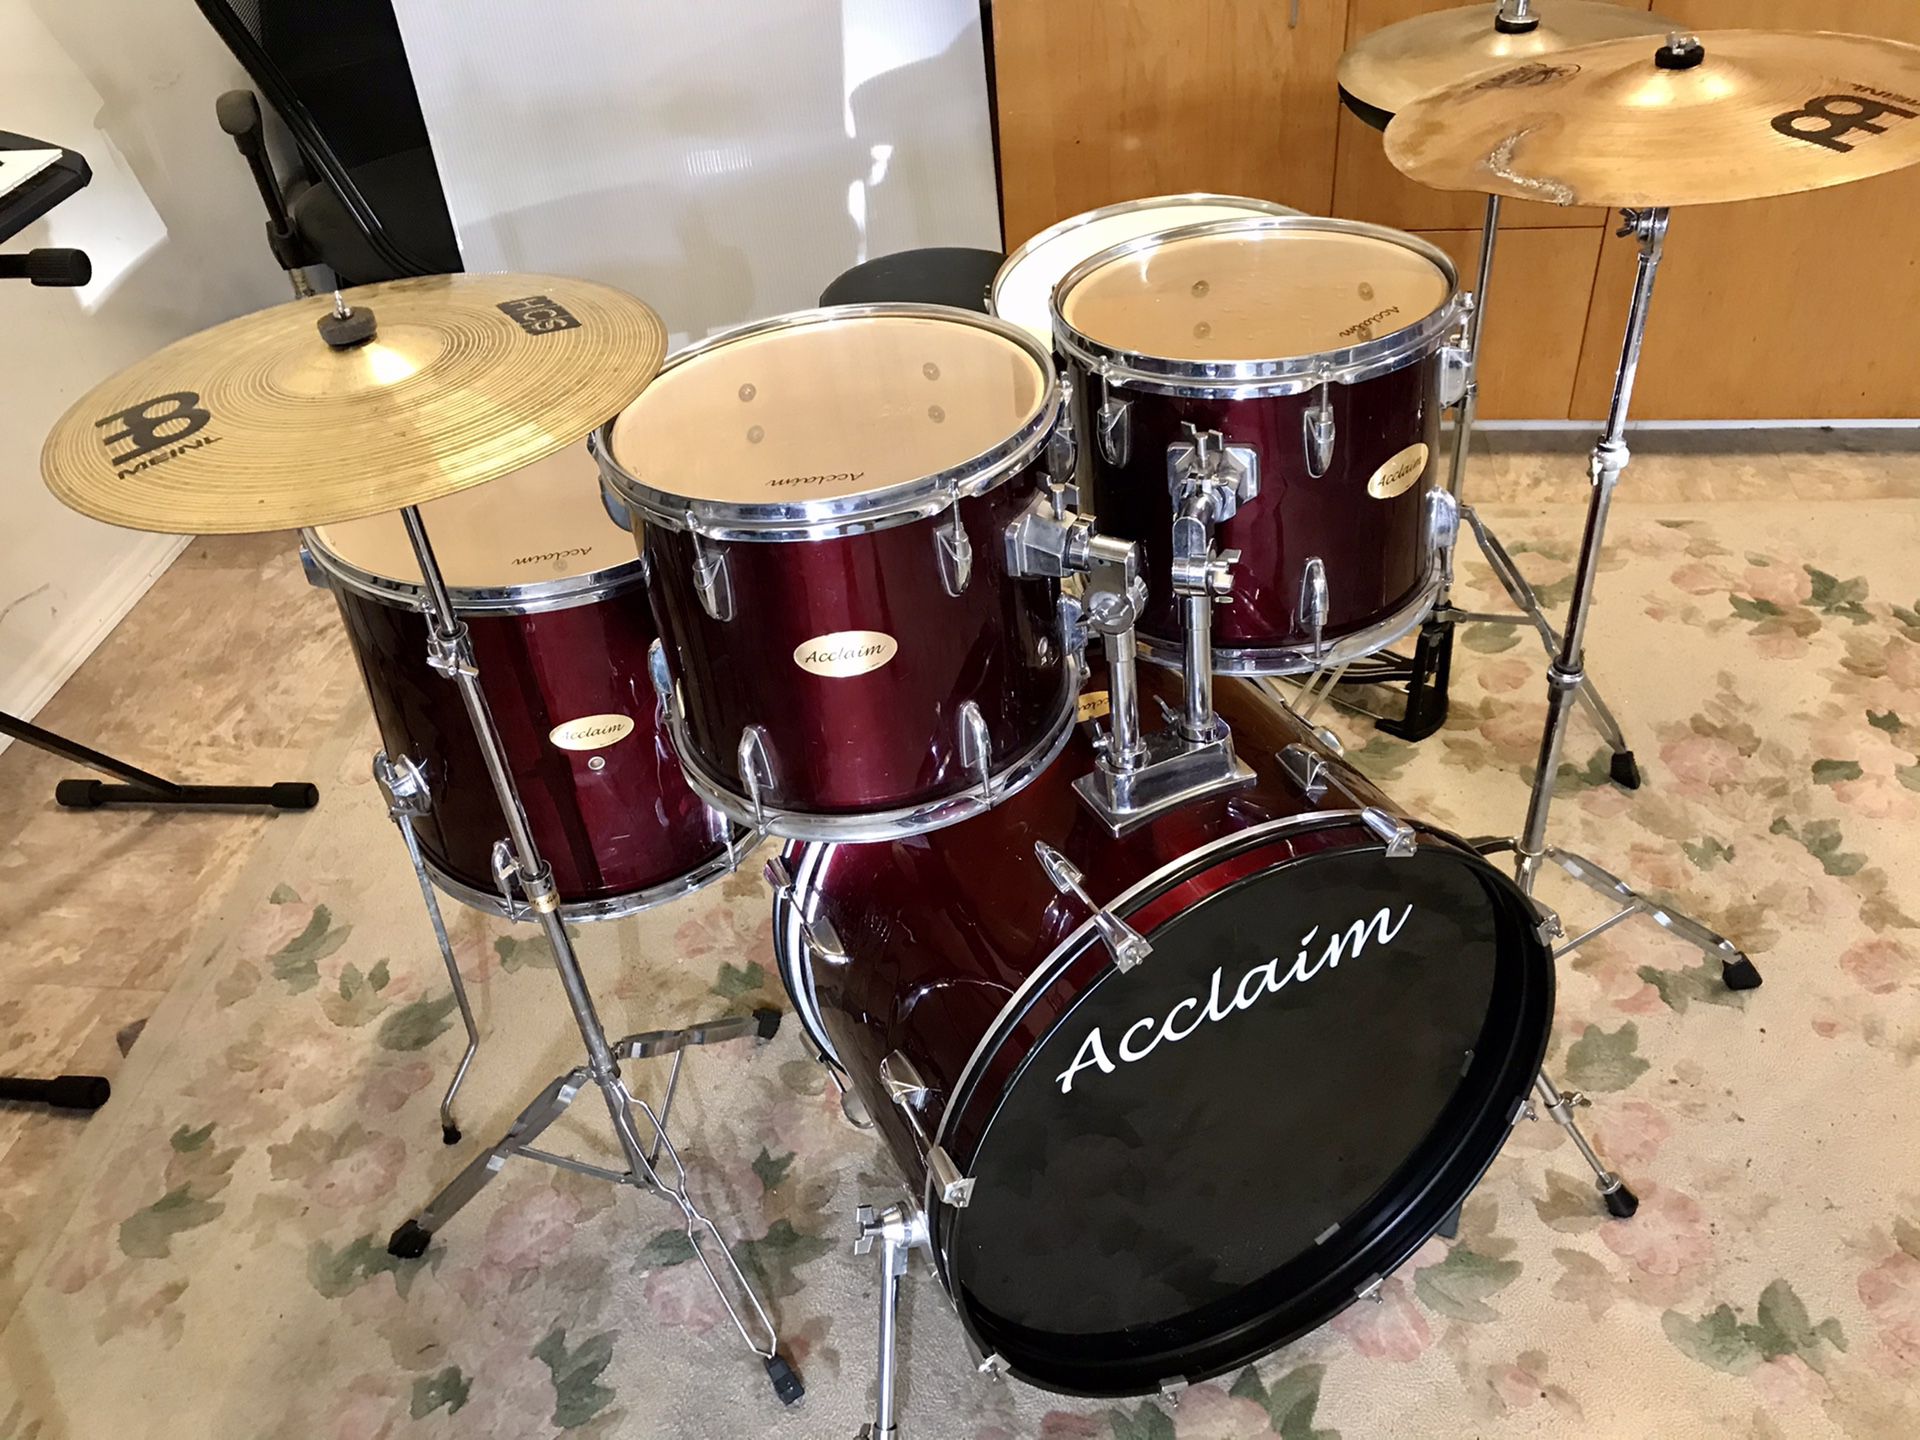 5 piece beginners drum set complete with cymbals As pictured $240 in Ontario 91762